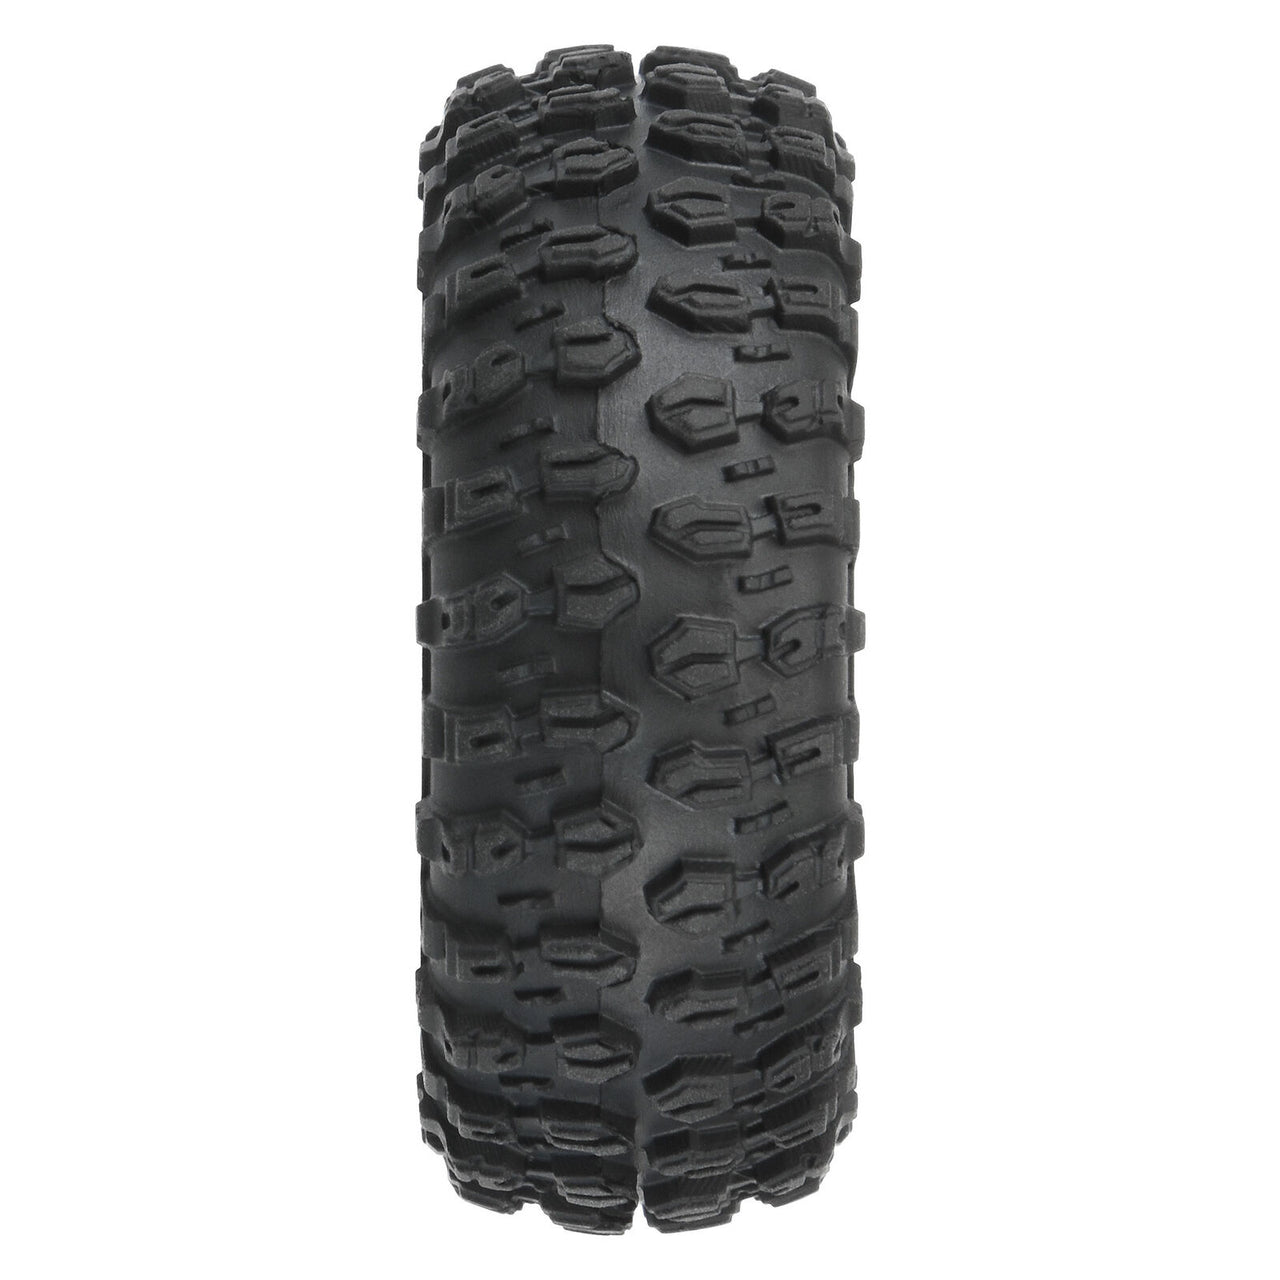 PRO1019410 1/24 Hyrax Front/Rear 1.0" Tires Mounted 7mm Black Impulse (4)